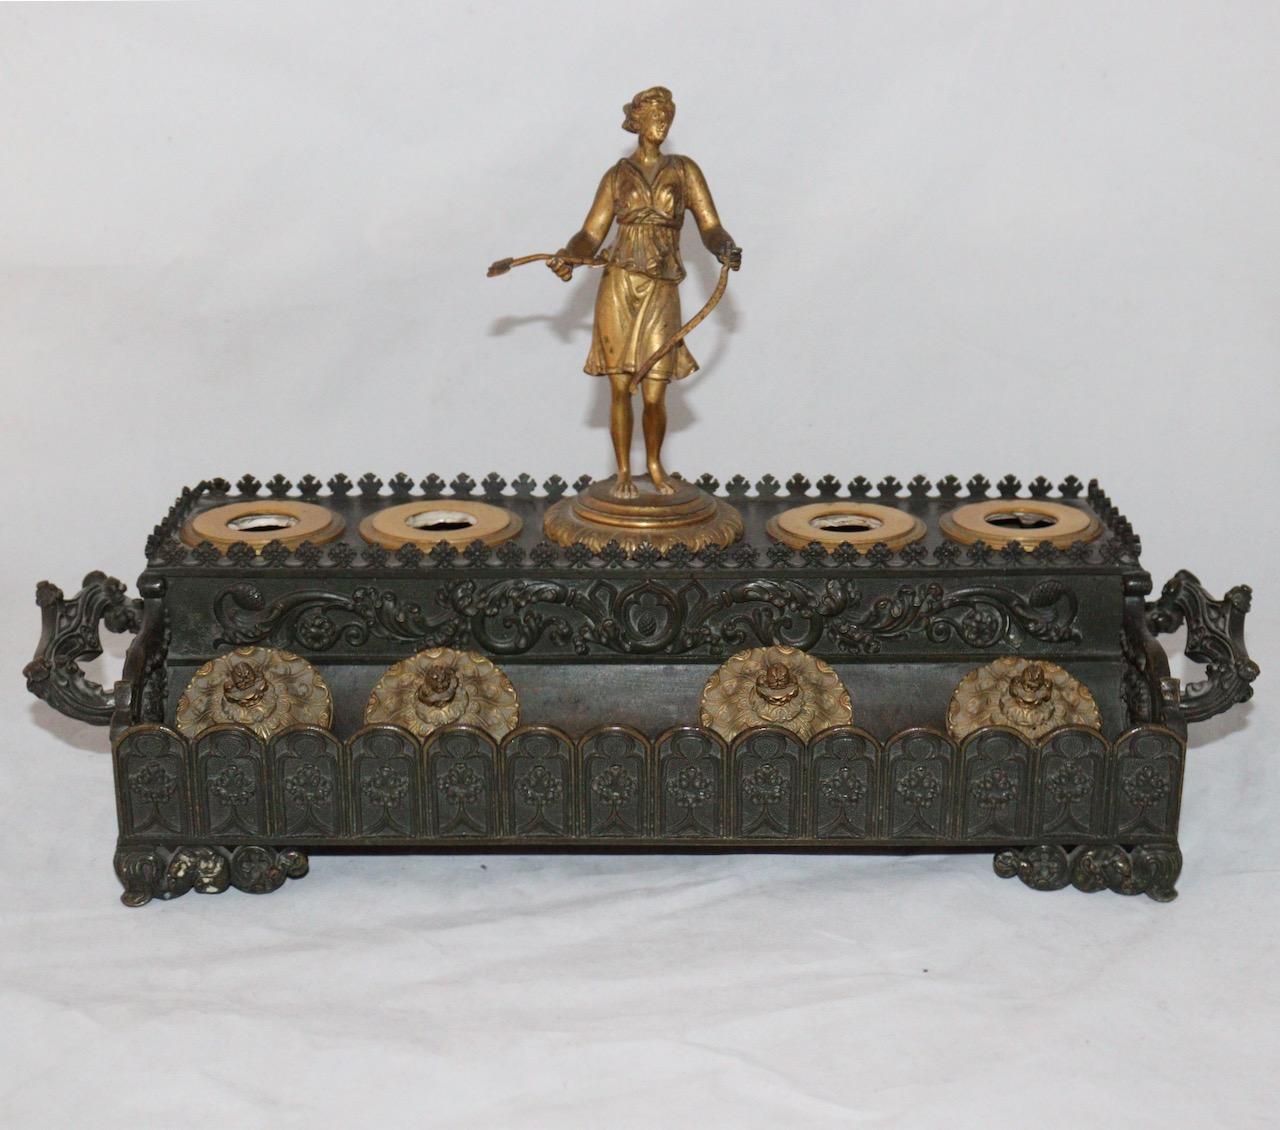 Diana the Huntress 
A Louis Philippe Neo-Gothic Style Ormolu Inkwell
Rectangular in brown patina bronze and gilt bronze. 
The tier presents in its center a statuette of Diana the Huntress and four receptacles for powder and ink on either side.